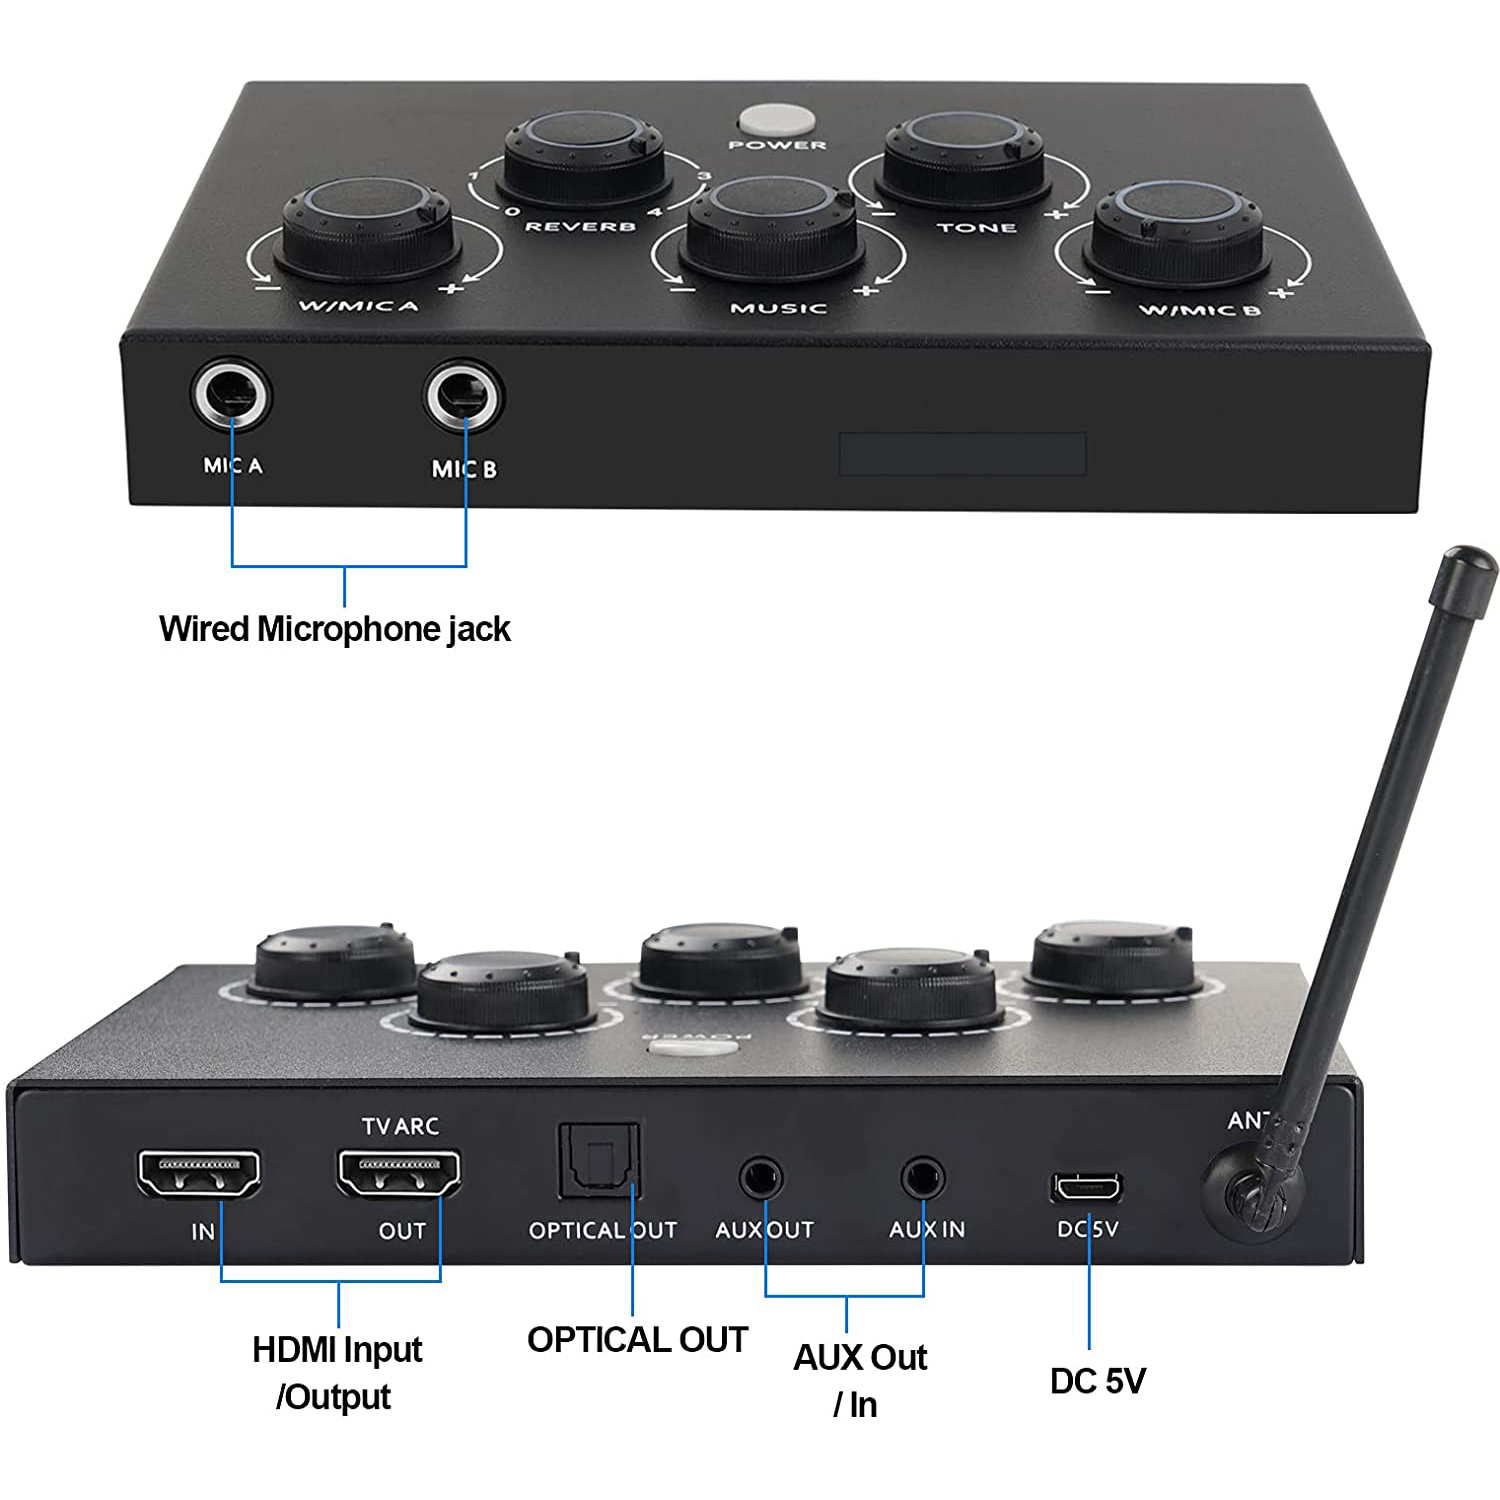 Portable Karaoke Microphone Mixer System Set, with Dual UHF Wireless Mic, HDMI-ARC / Optical / AUX & HDMI in/Out in Singing Receiver for Smart TV, PC, KTV, Theater, Amplifier, Microphone